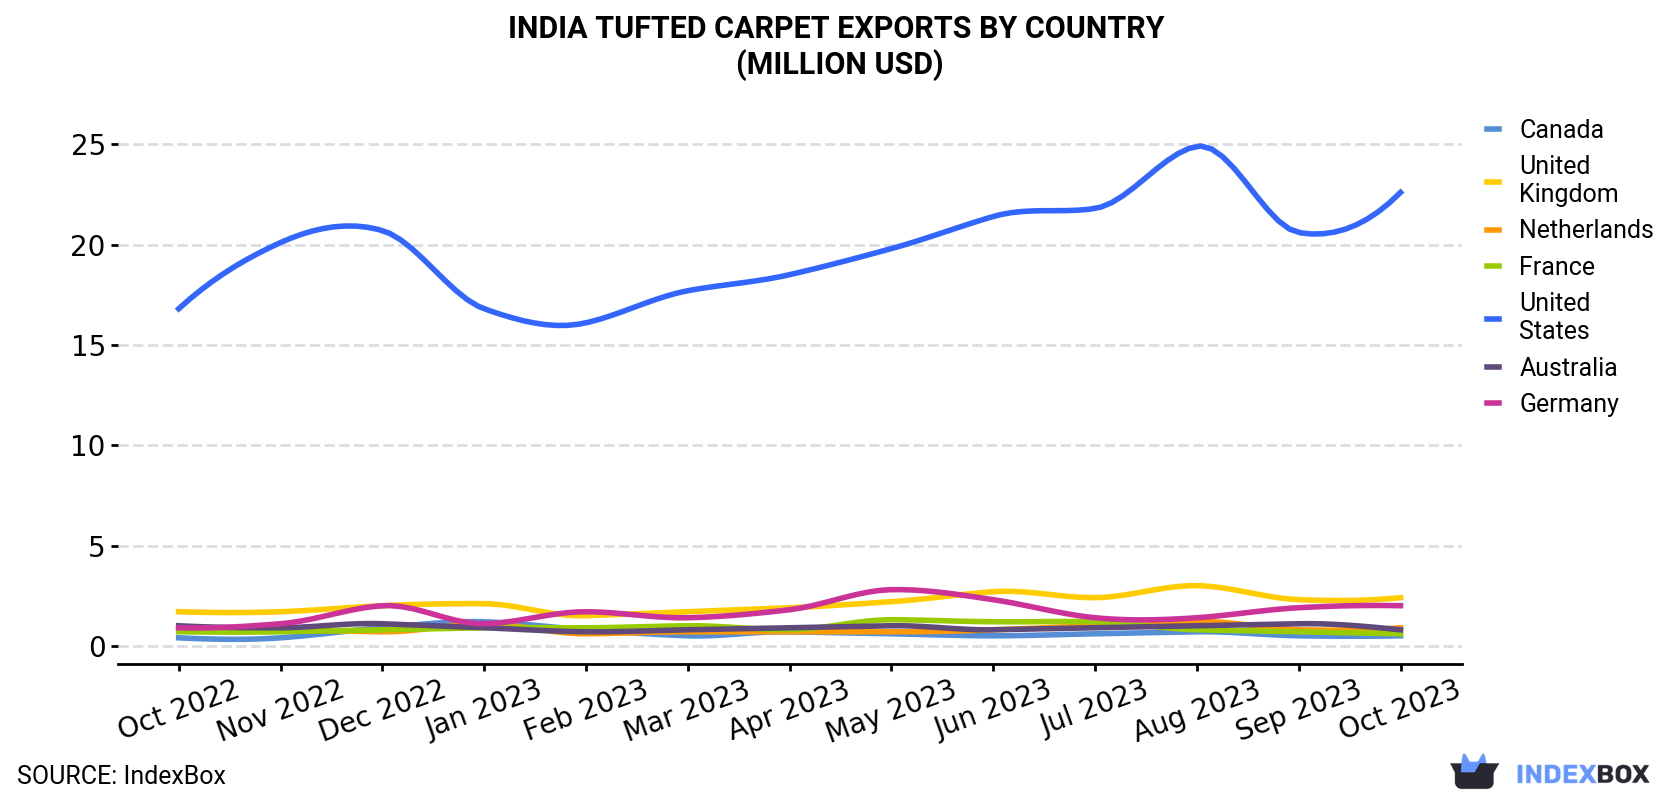 India Tufted Carpet Exports By Country (Million USD)